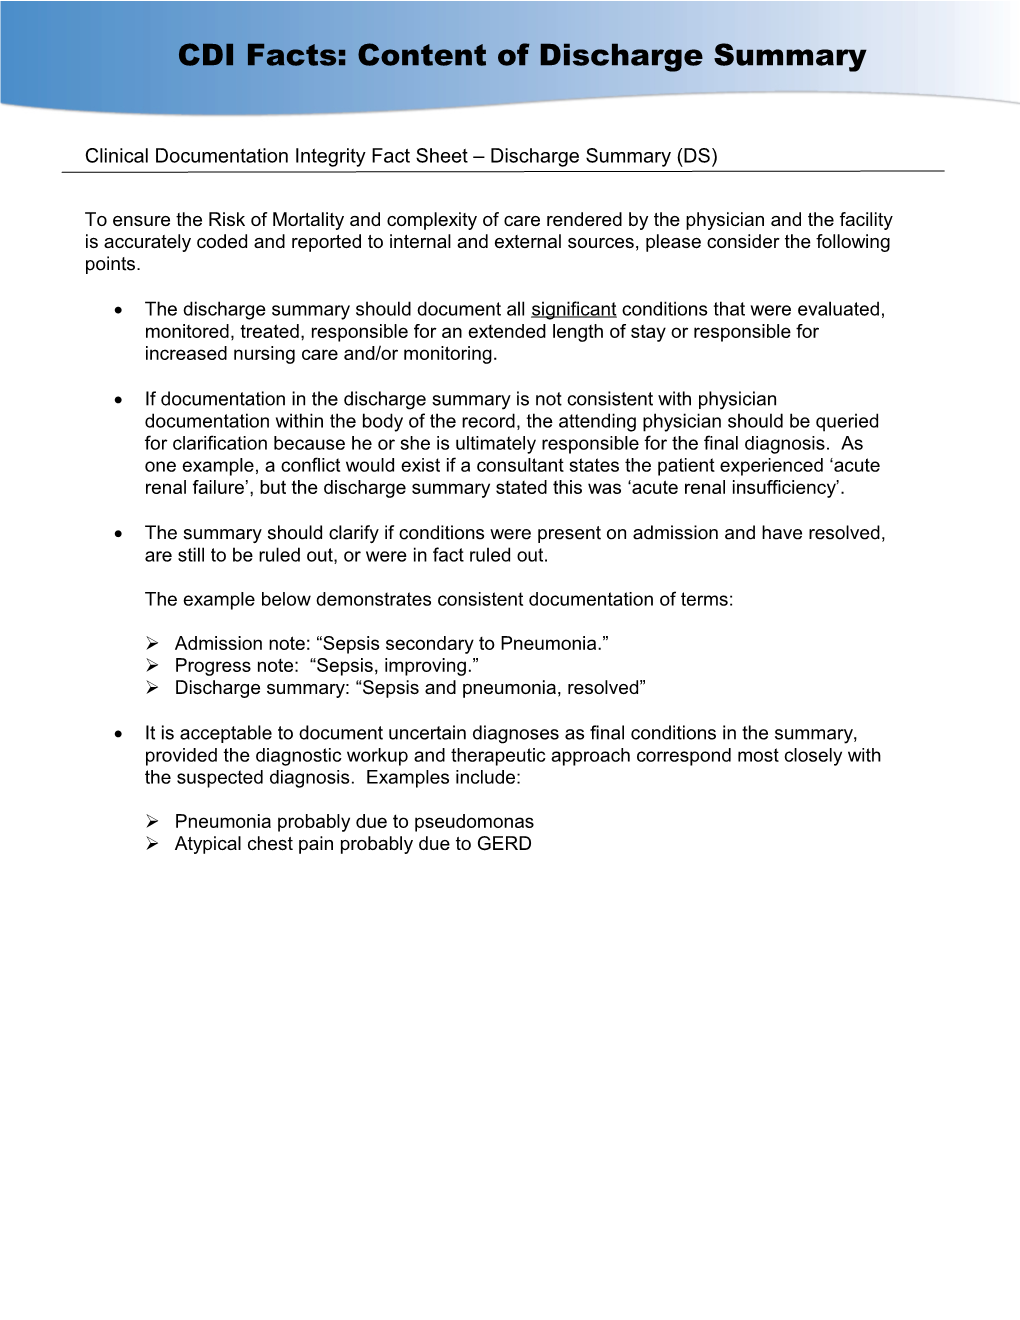 Clinical Documentation Integrity Fact Sheet Discharge Summary (DS)